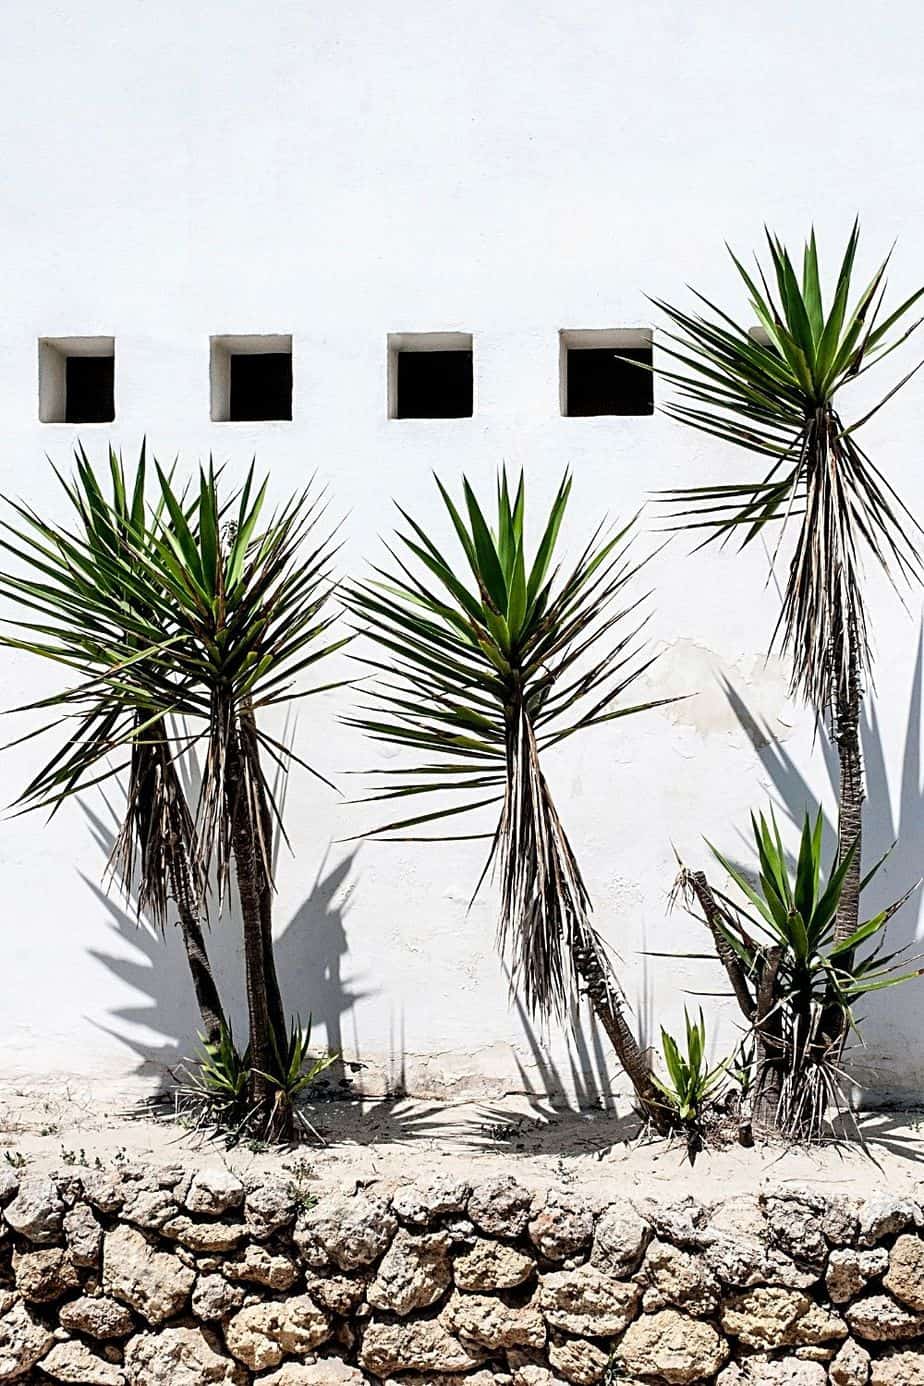 Yucca is another cheap plant you can grow in your garden for privacy